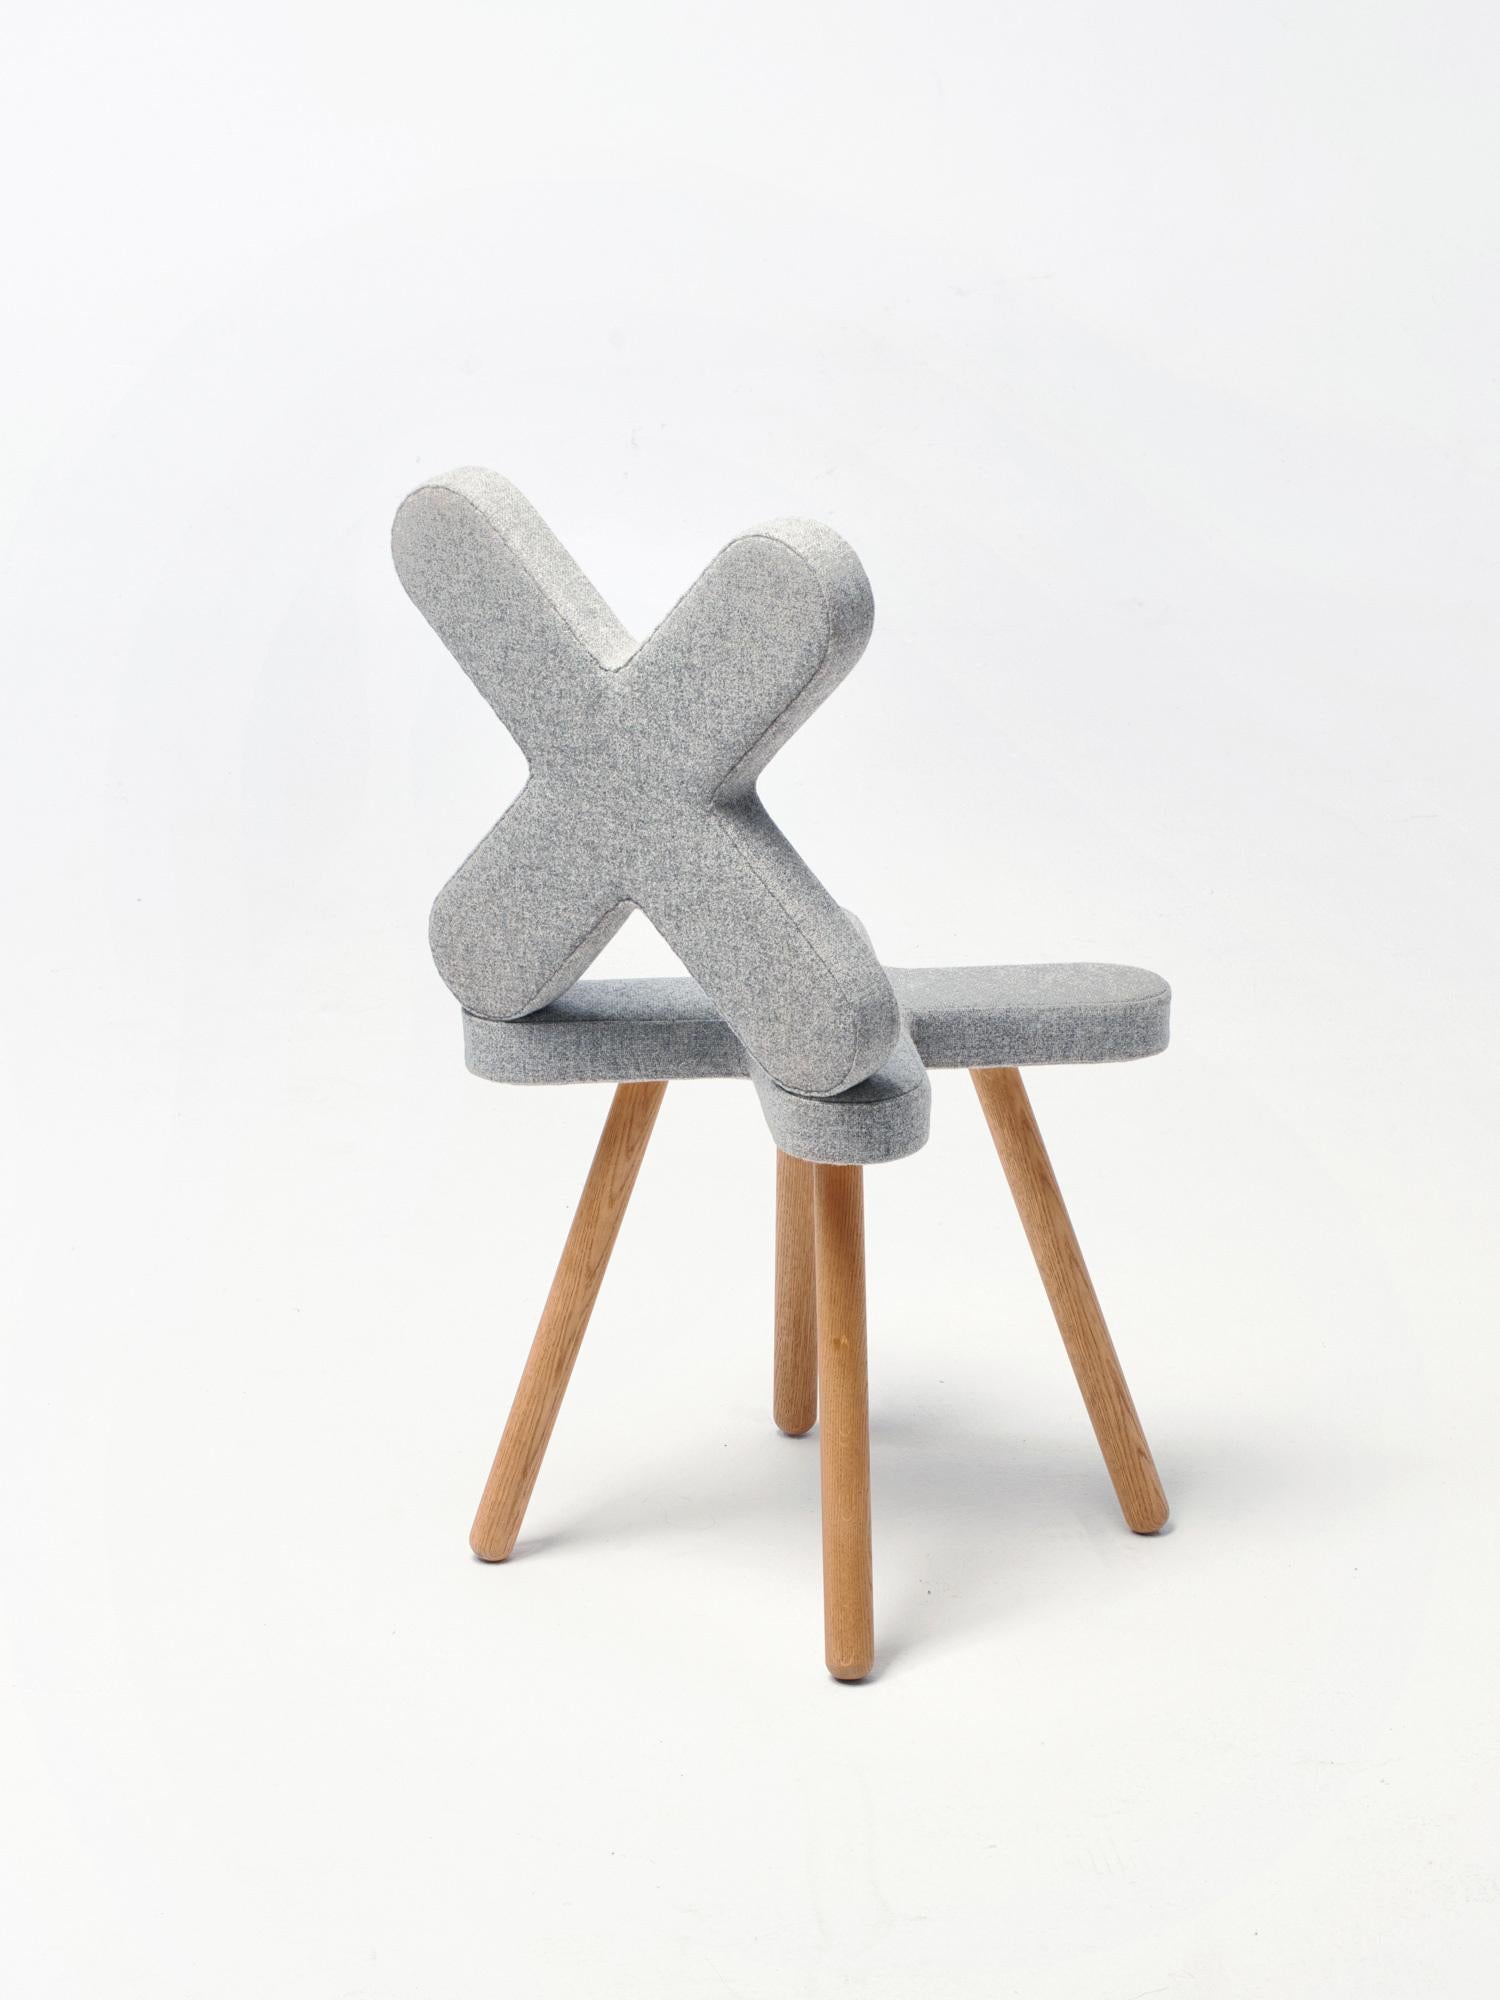 Cross is an upholstered chair and stool collection, working with the manipulation of scale, while experimenting with ergonomics, following the creative principle applied in Pinsofa. This approach leads to unusual objects and situations upturning the